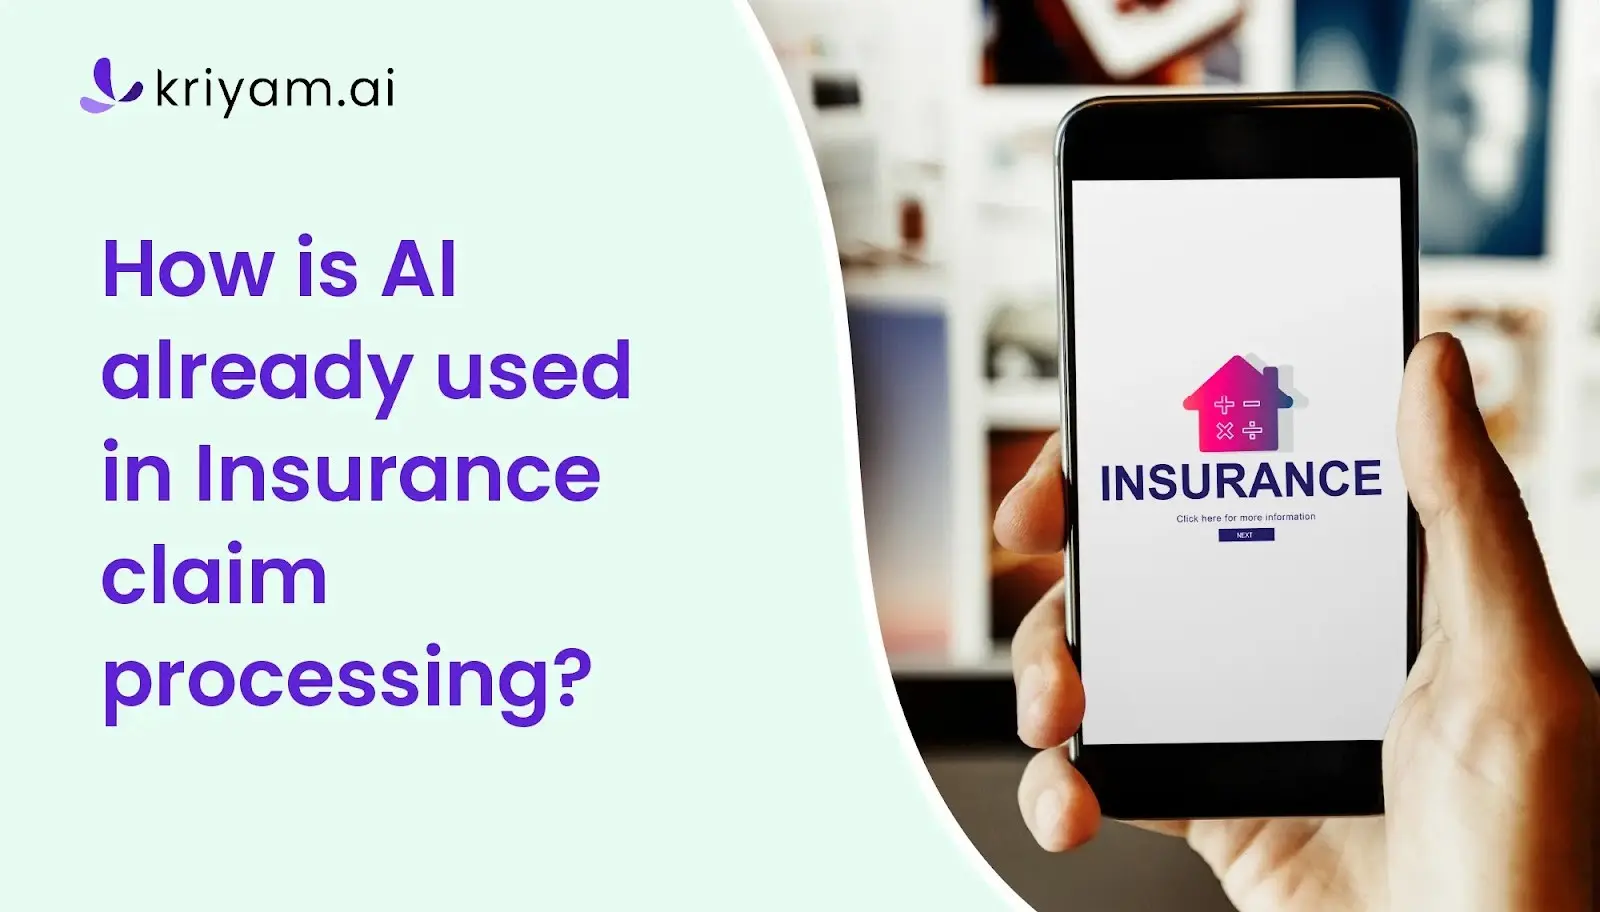 How is AI already used in Insurance claim processing?